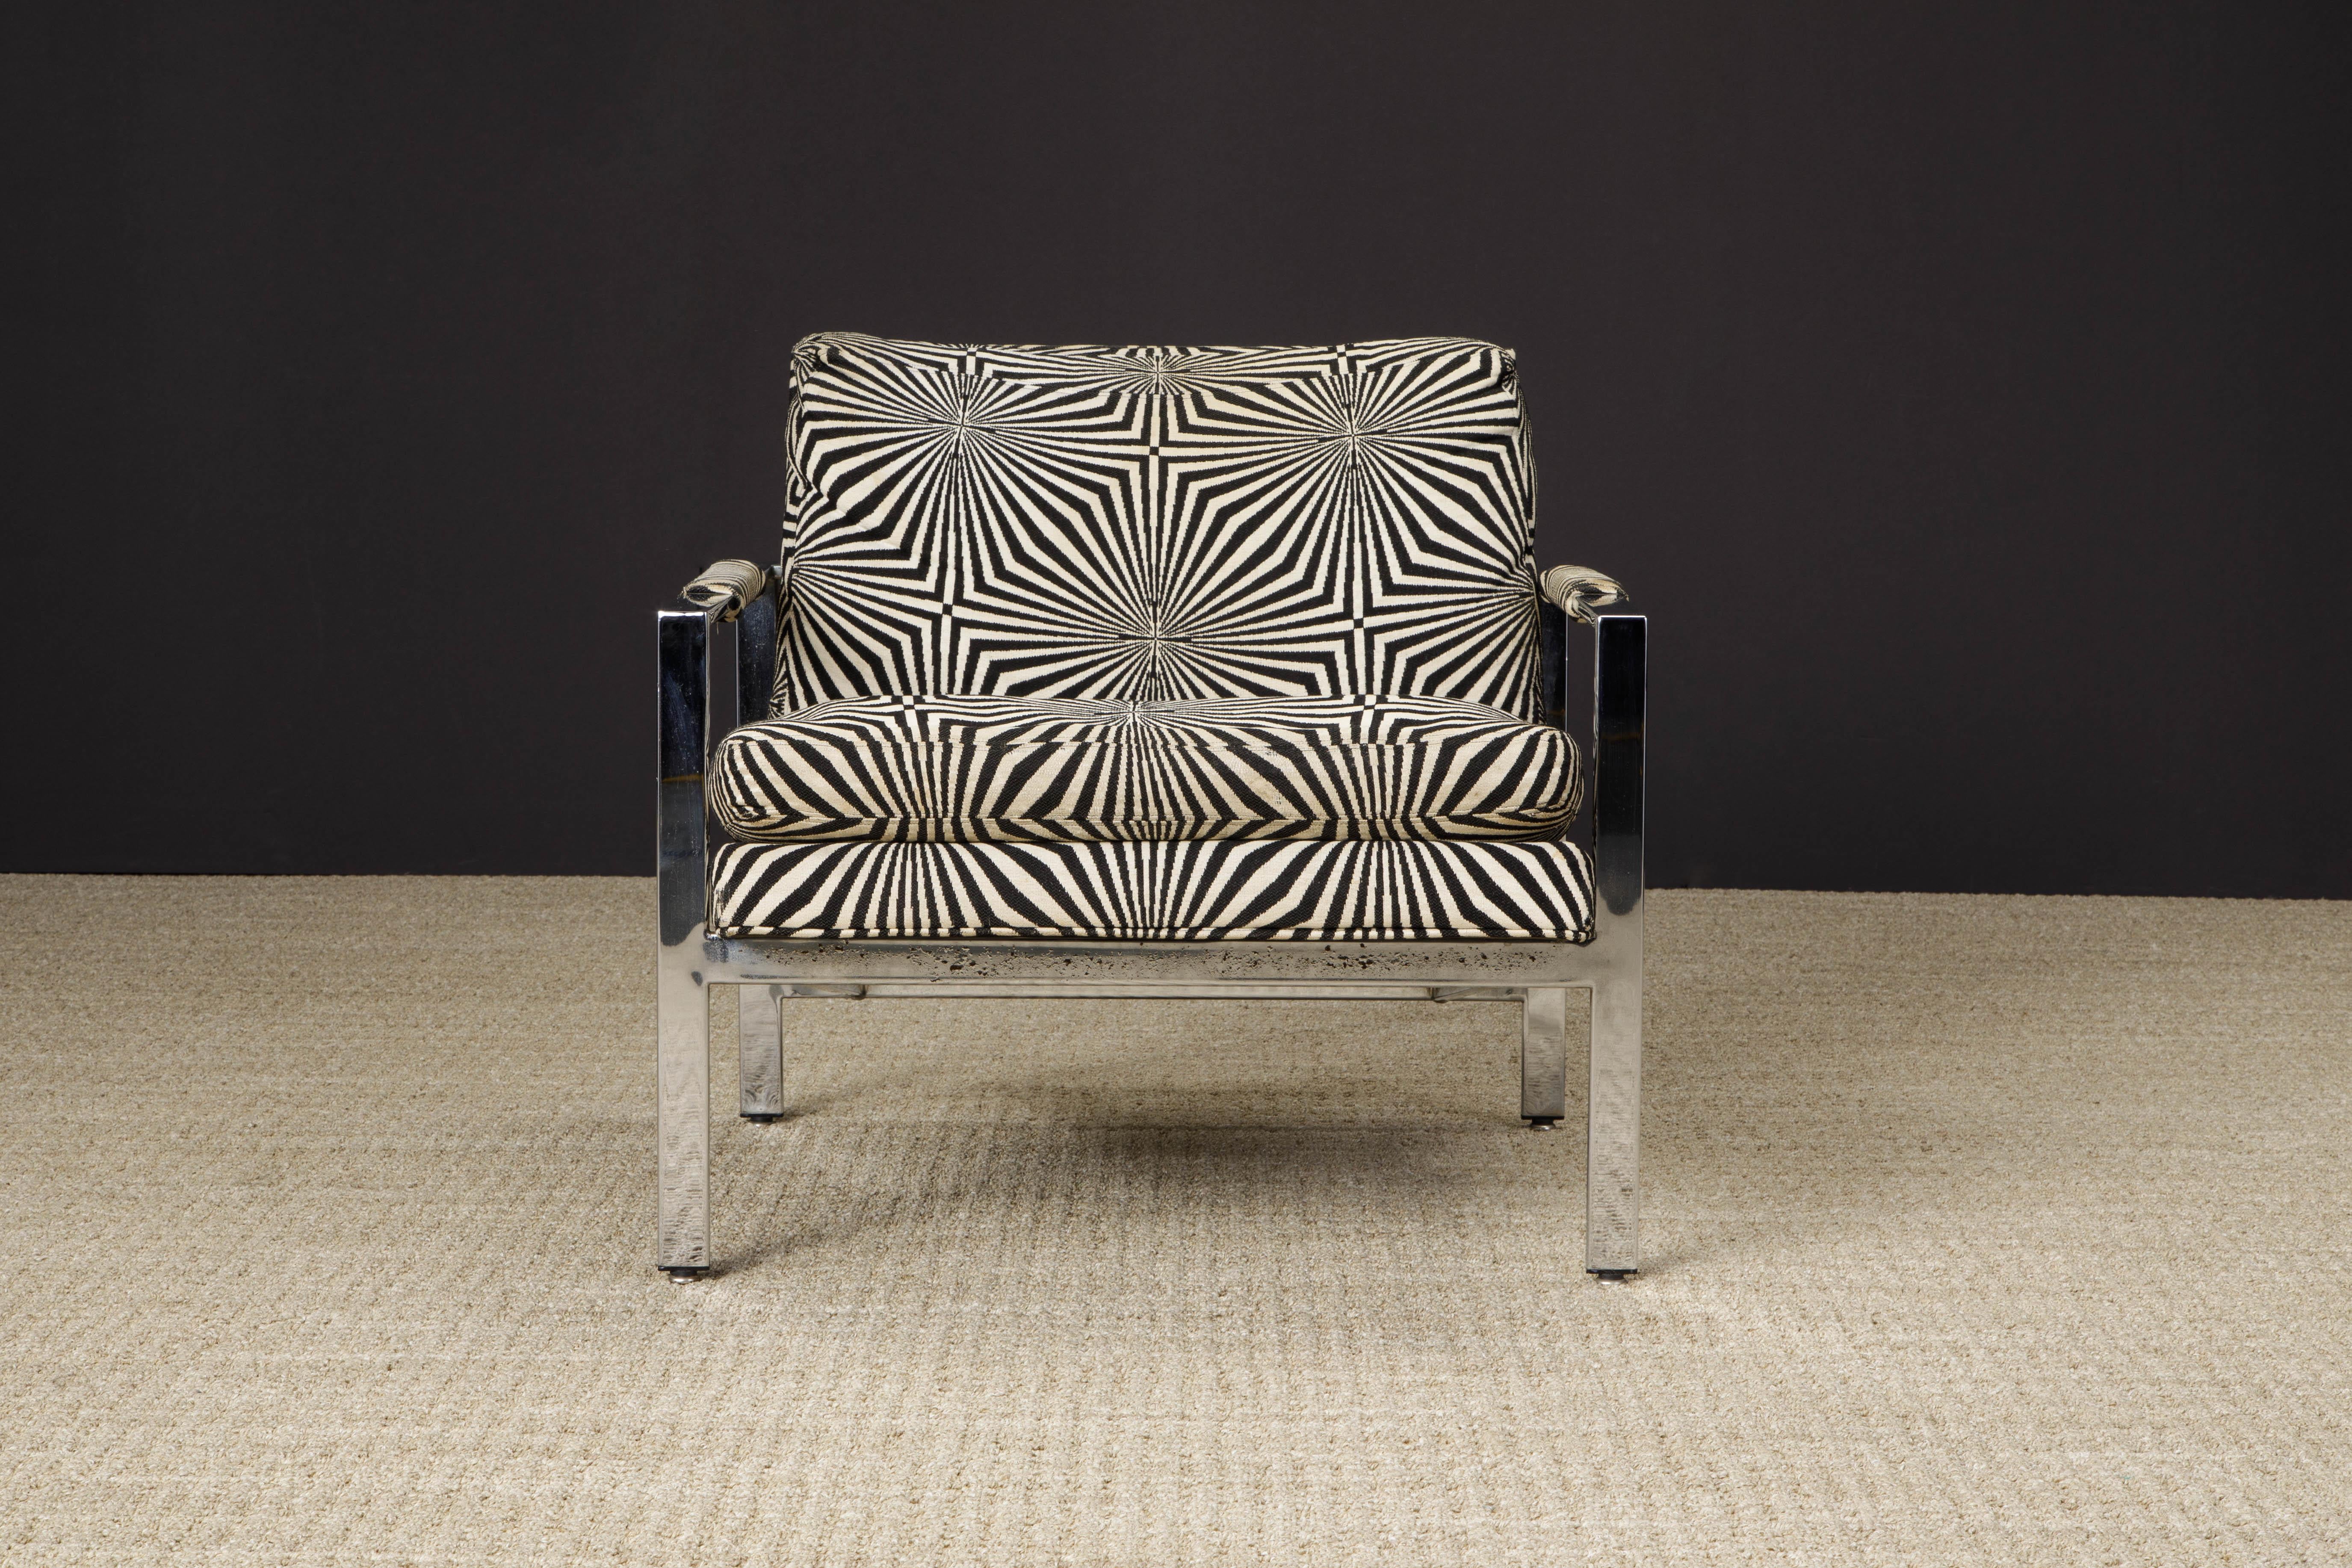 This beautiful flat-bar lounge chair by Milo Baughman for Thayer Coggin, designed in 1966, and produced by Thayer Coggin in High Point, North Carolina, in the late 1960s, this collectors piece has its original groovy fabric - inspired by OP artists